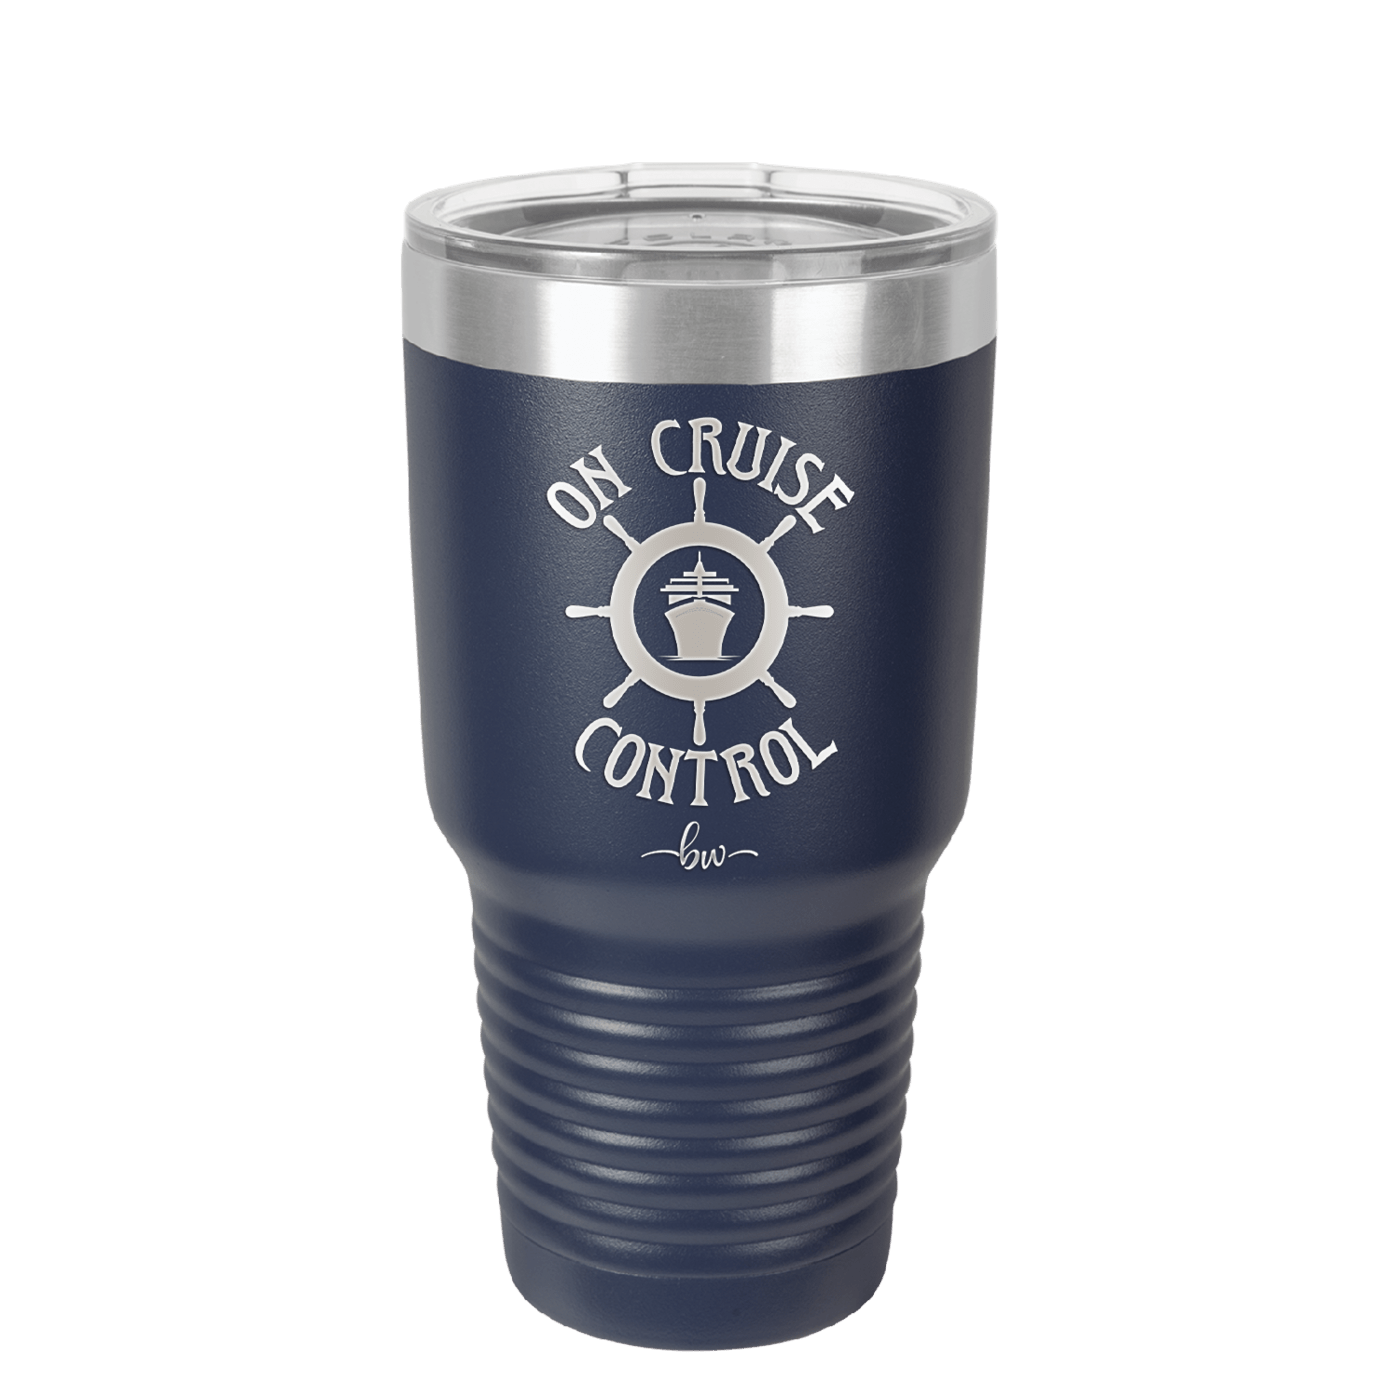 On Cruise Control Ship and Wheel - Laser Engraved Stainless Steel Drinkware - 1433 -